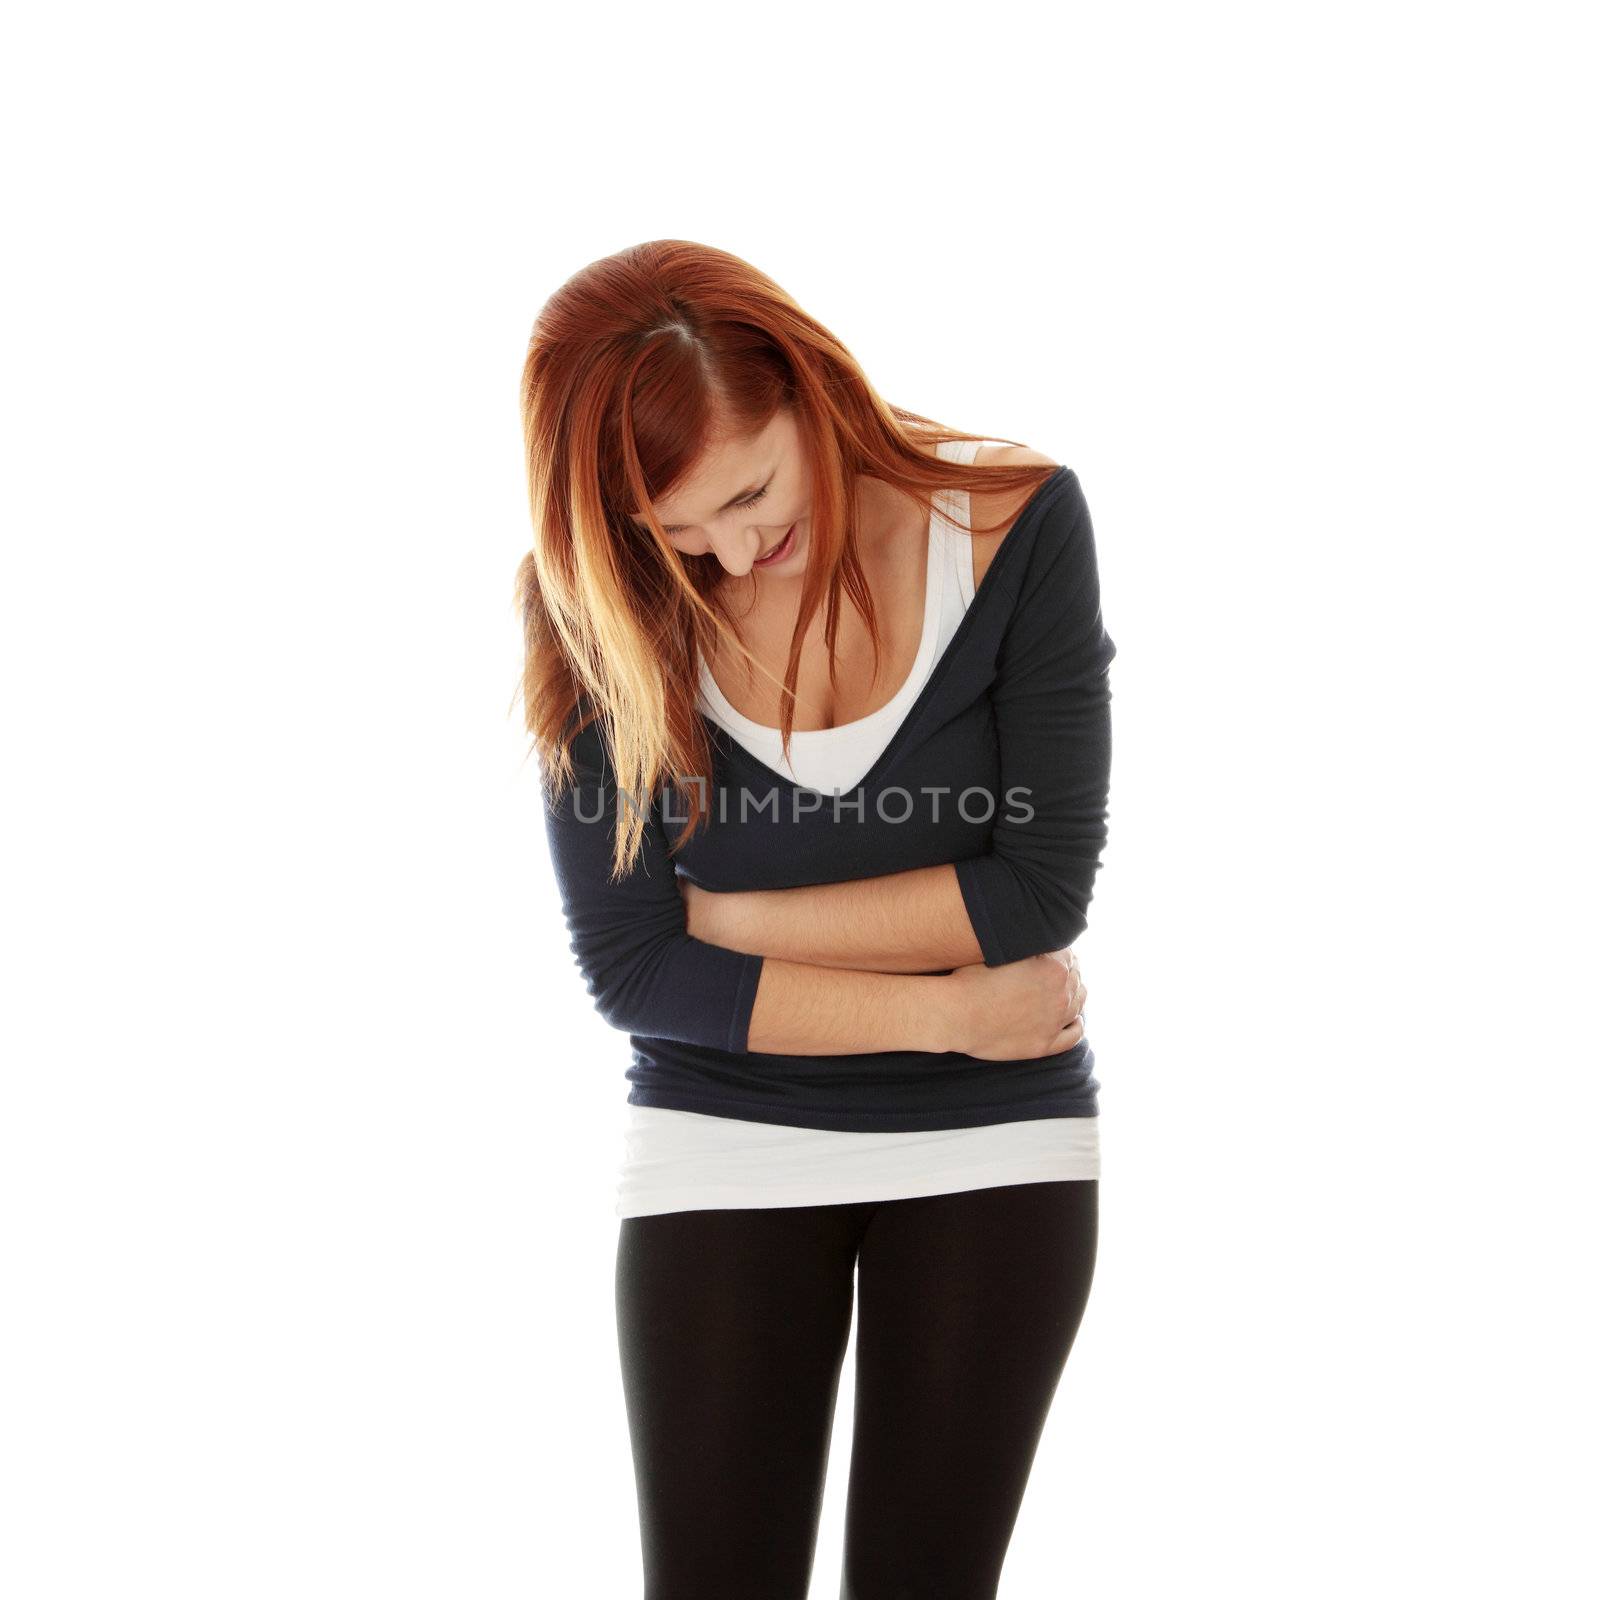 Woman with stomach issues,isolated on white